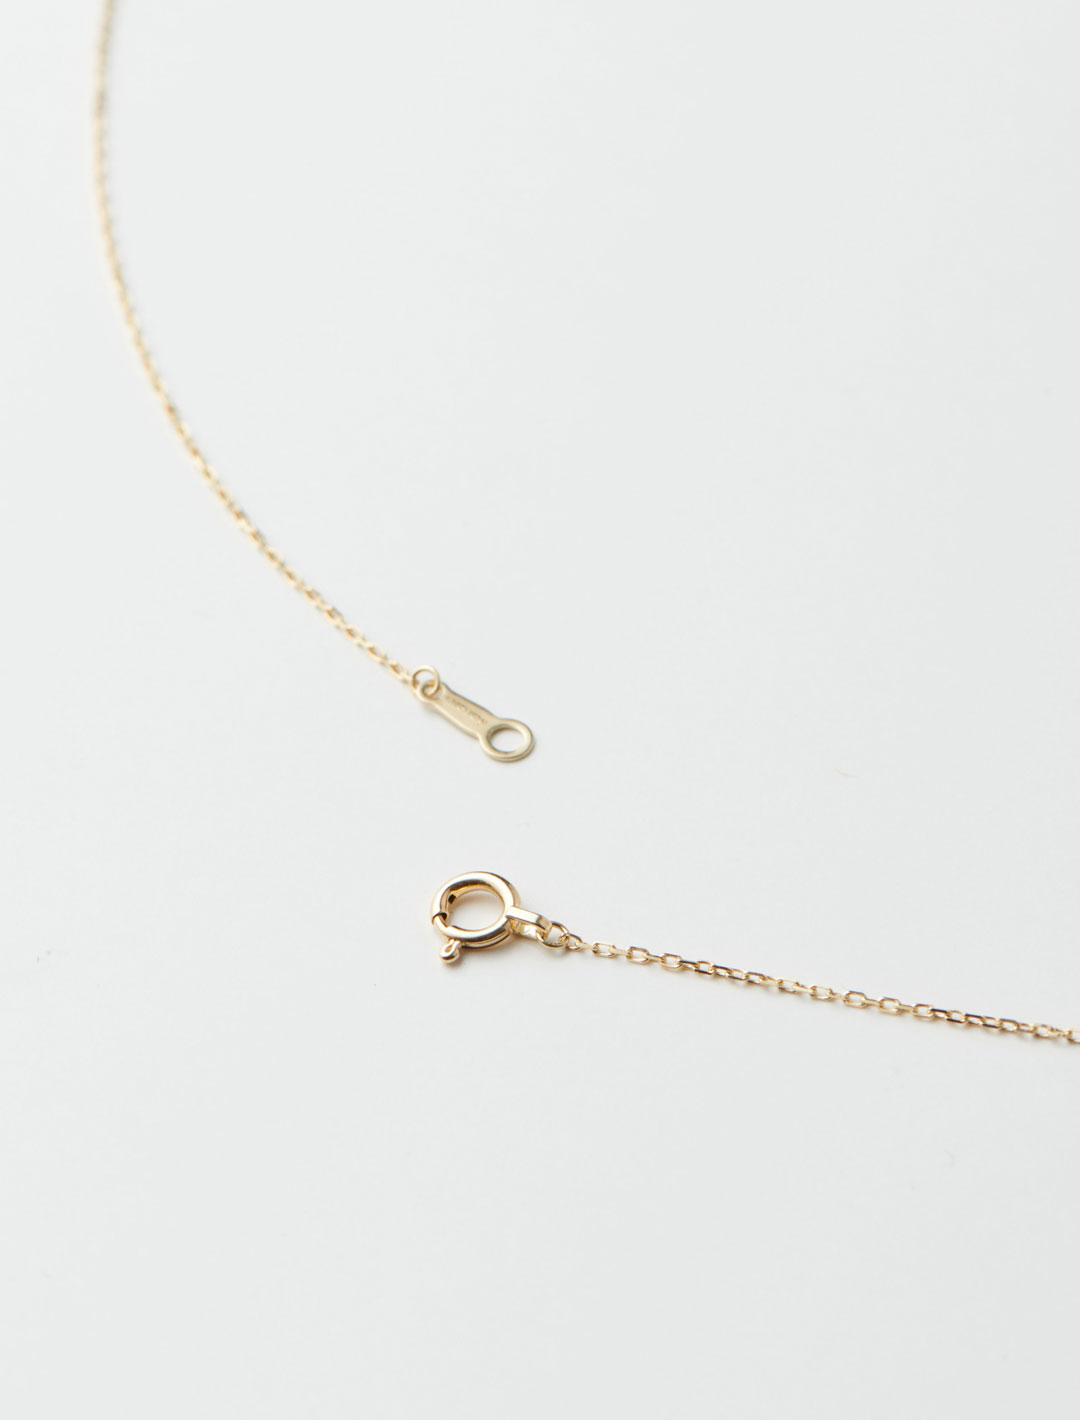 MIRROR Necklace M 65cm - Yellow Gold